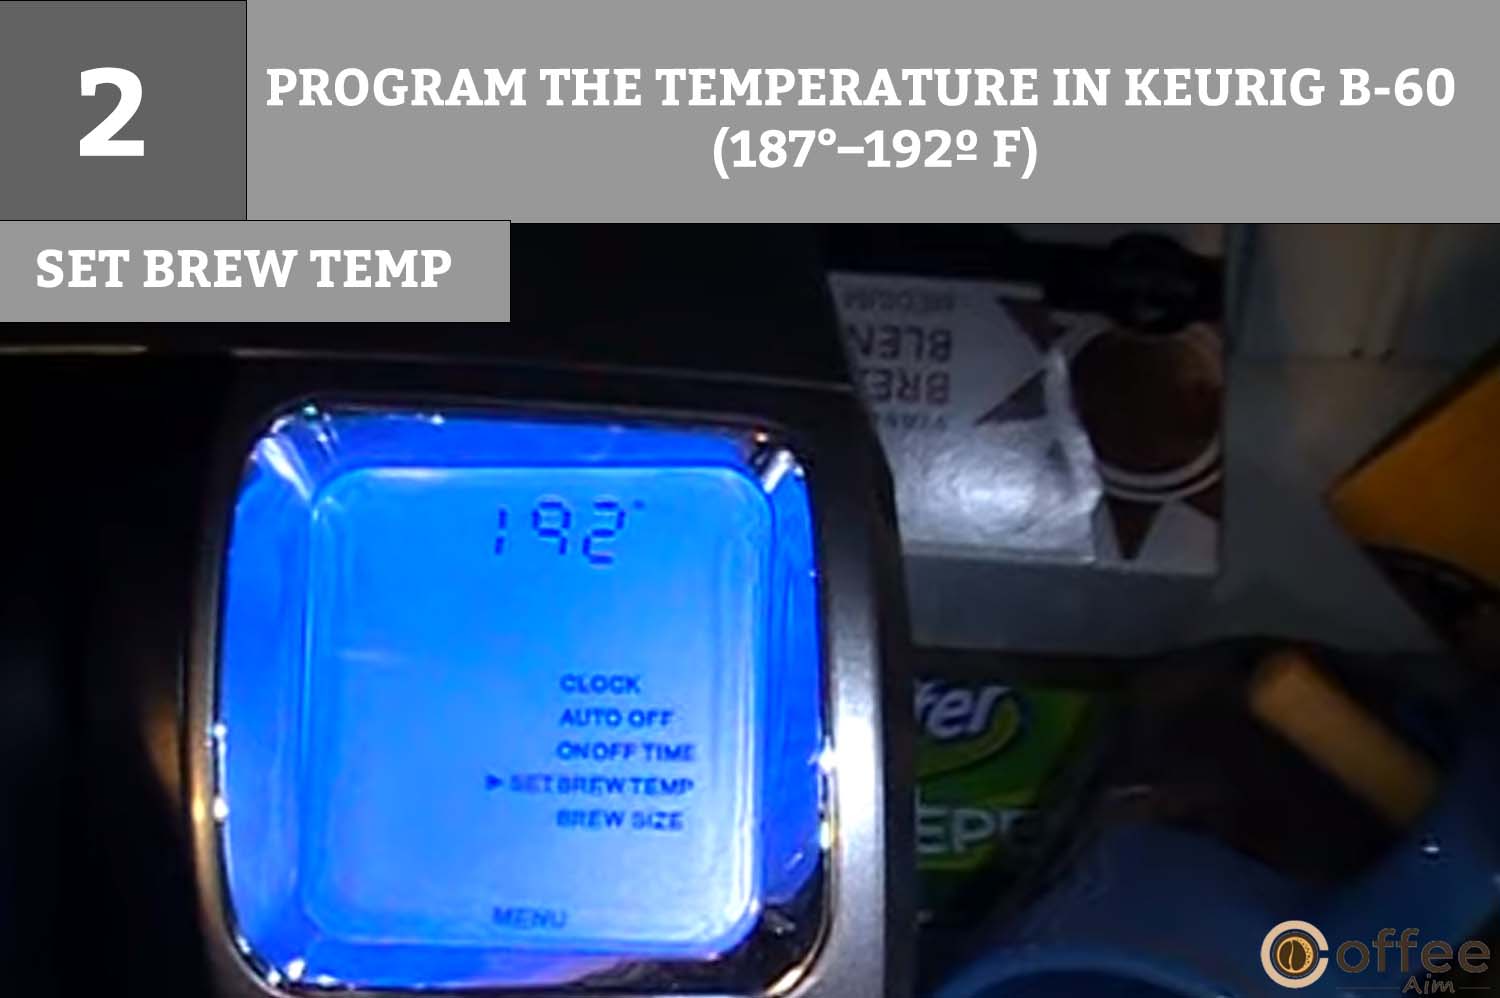 You will see "SET BREW TEMP" on the LCD Control Center with a small arrow next to it.